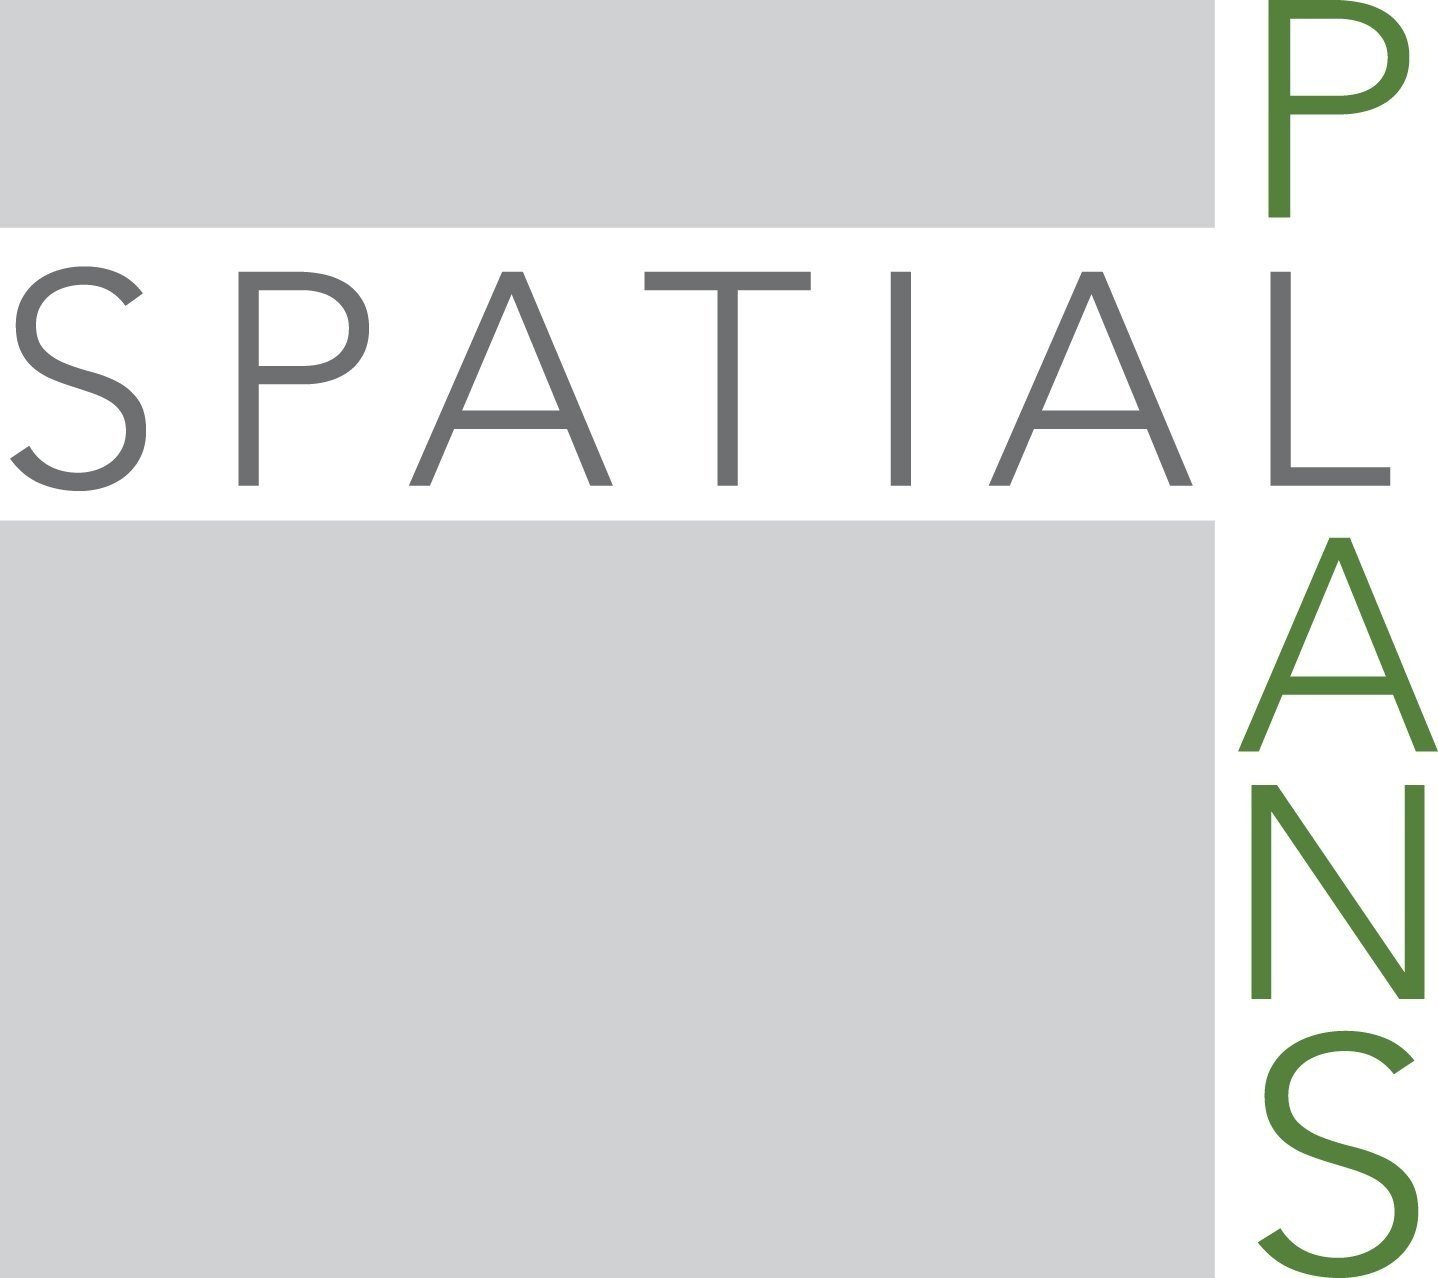 Spatial Plans - Consulting for Transportation Planning, GIS, Technical Writing and Staff Support